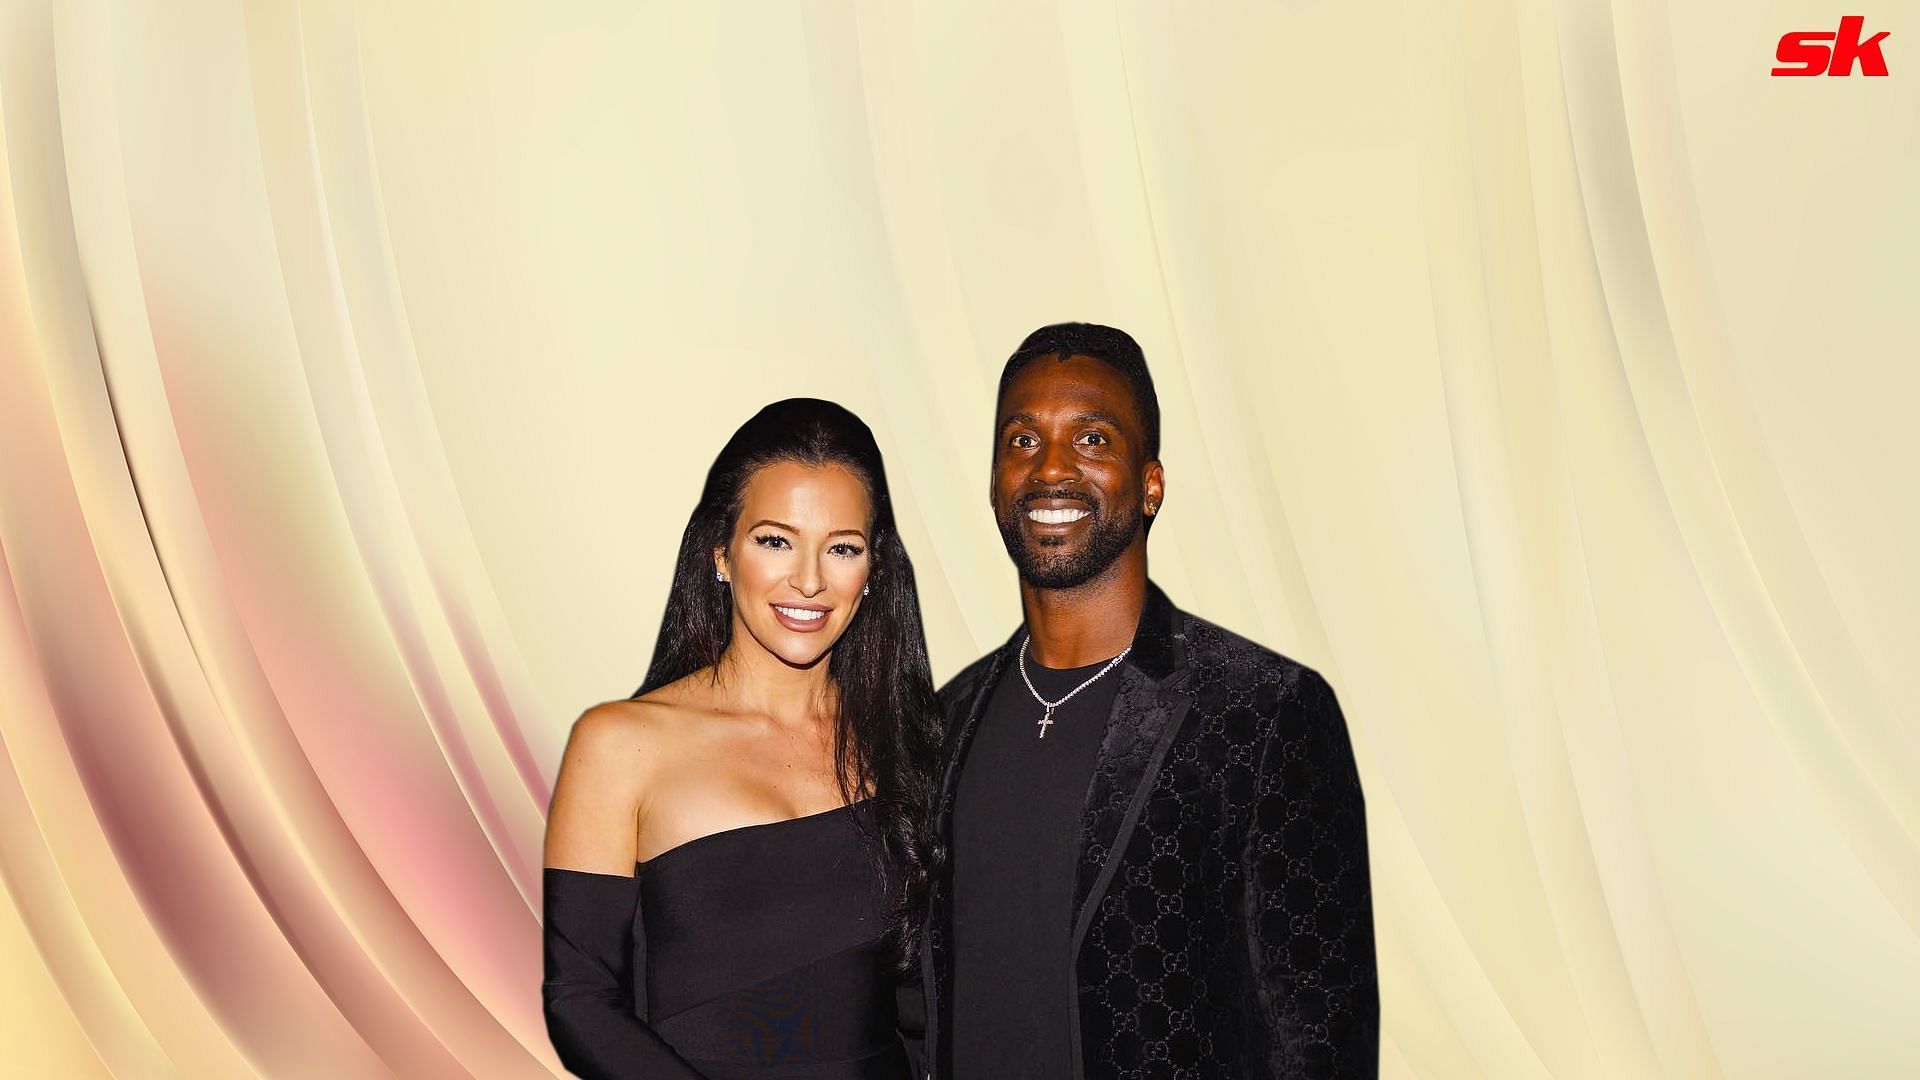 Andrew McCutchen and wife Maria stood out in classy all-black attire at the Roberto Clemente HOF ceremony